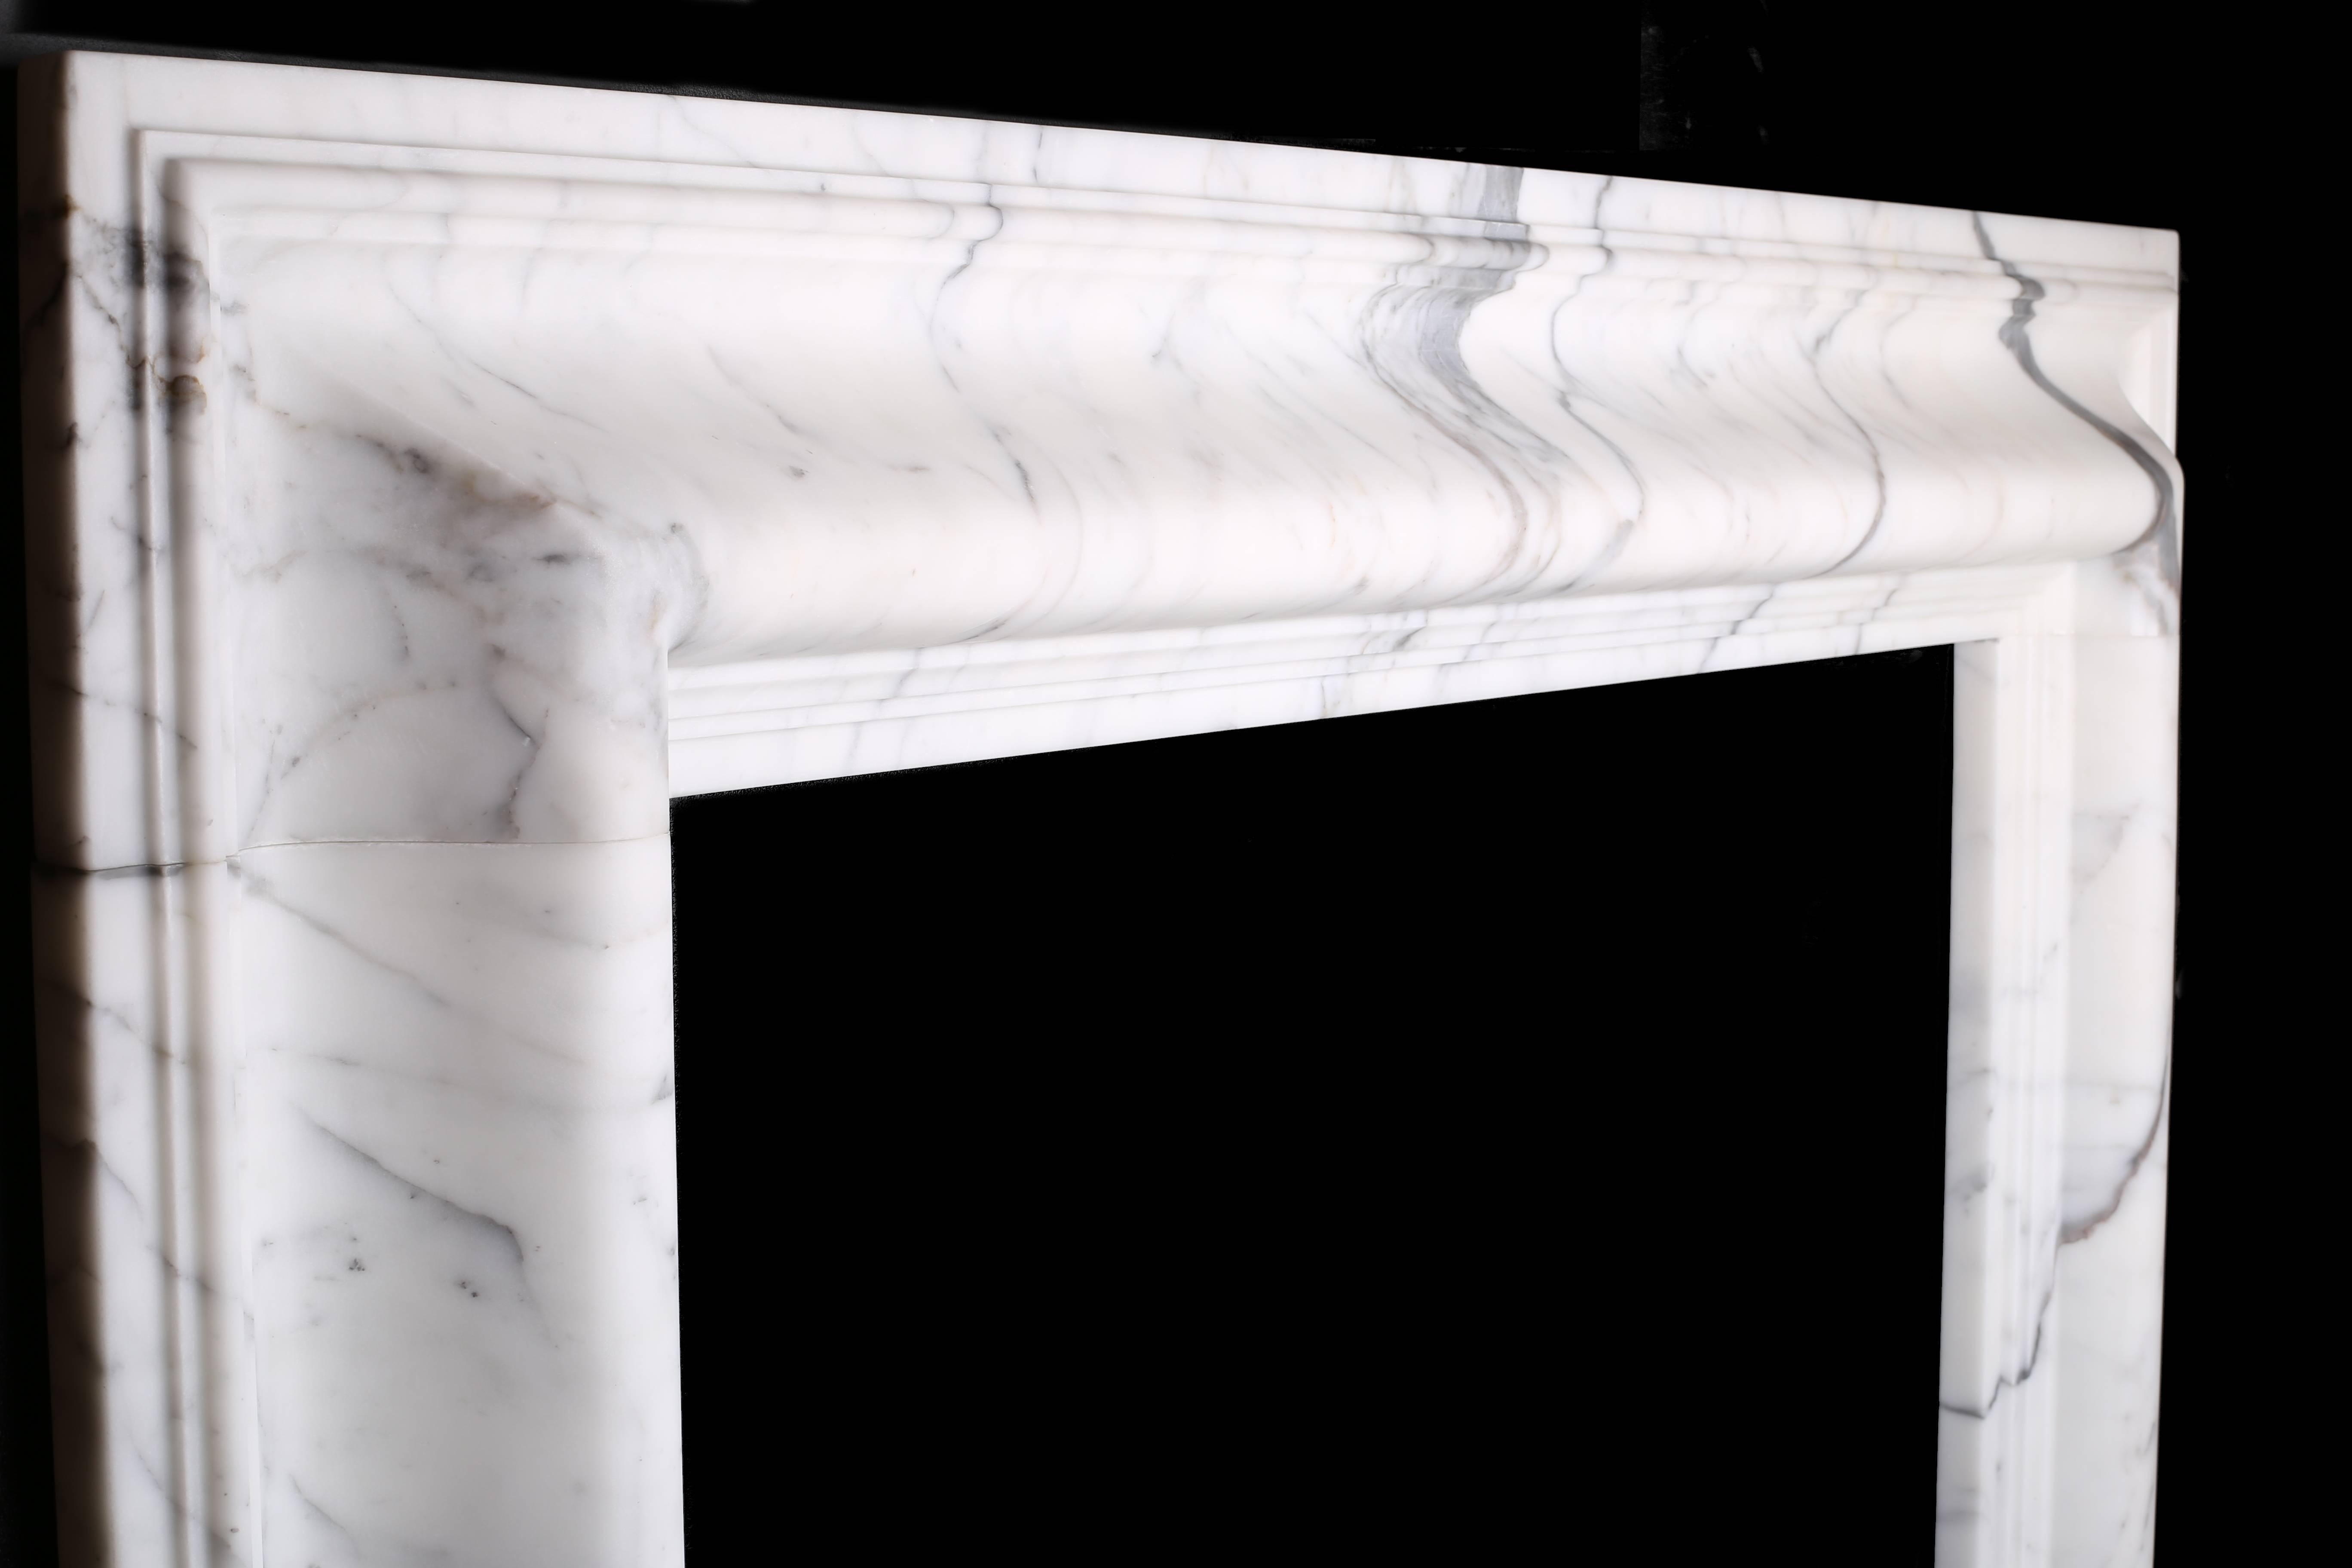 Grand Queen Anne Style Bolection Fireplace in Italian Statuary Marble In Excellent Condition For Sale In London, GB